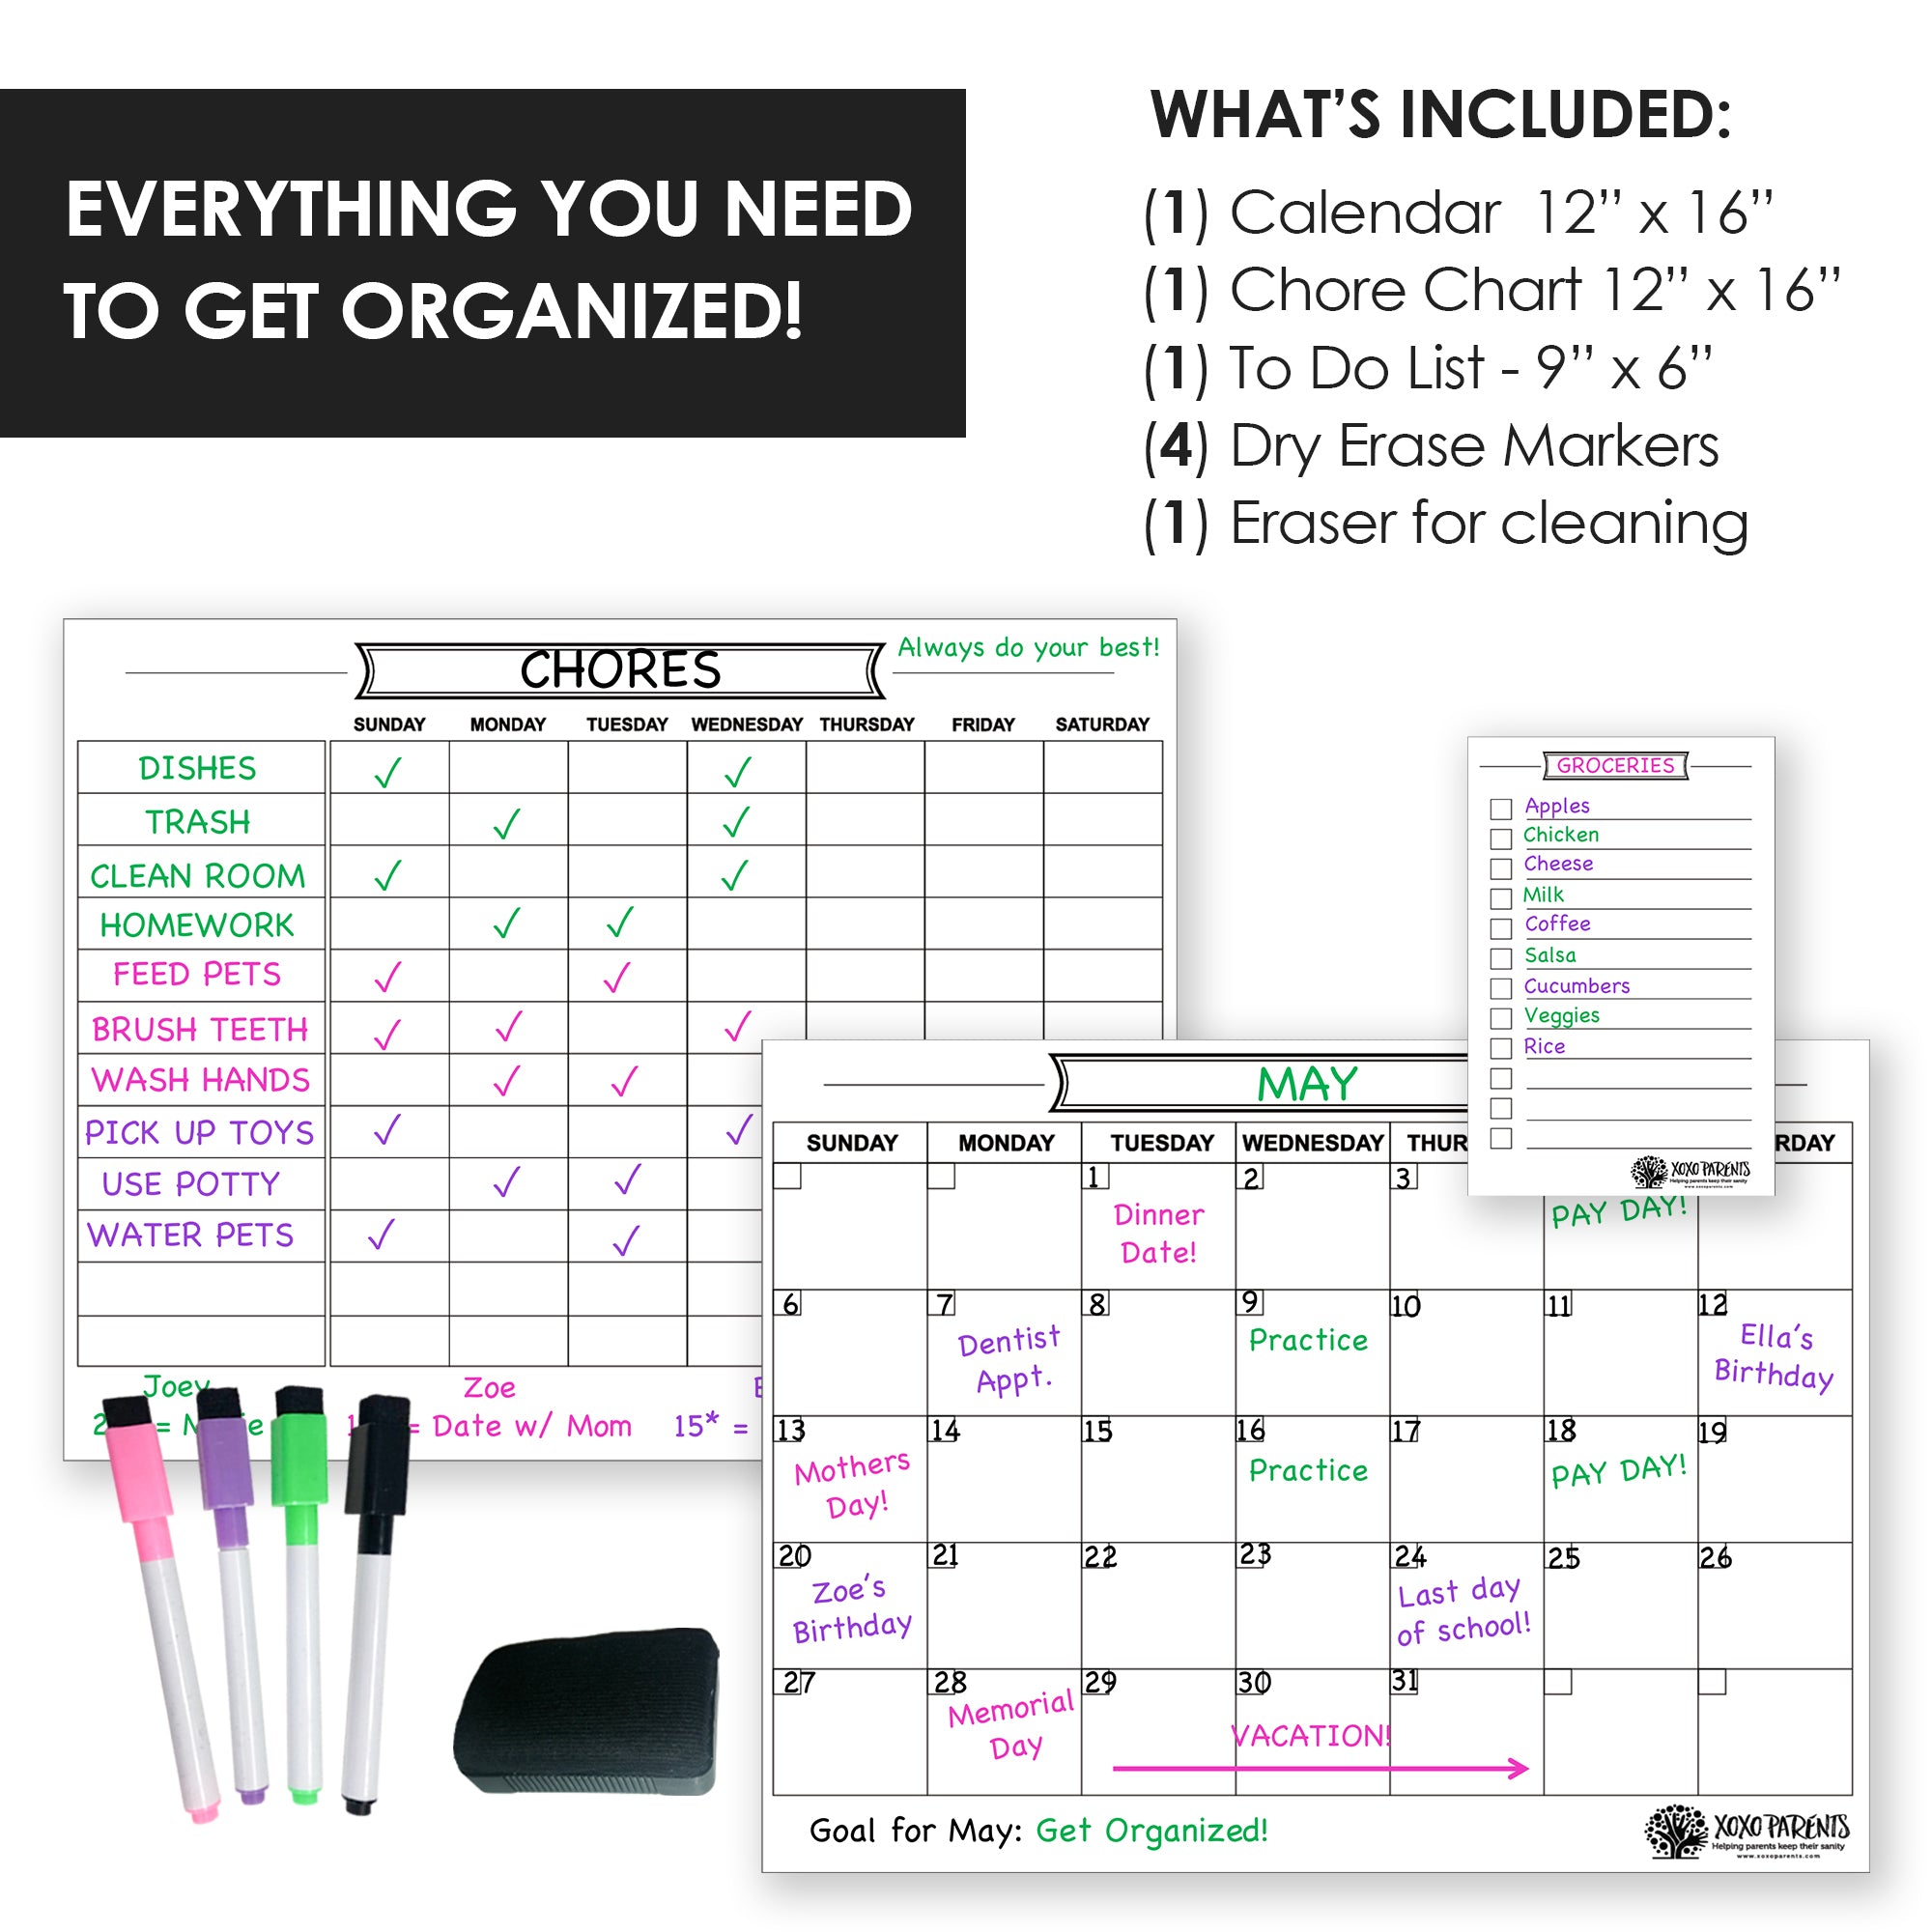 Magnetic Menu Board 11 X 16 Dry Erase Calendar Set With 4 Markers, Fridge  Calendar Board With Weekly Meal Planner; Grocery List Kitchen Planner Mess